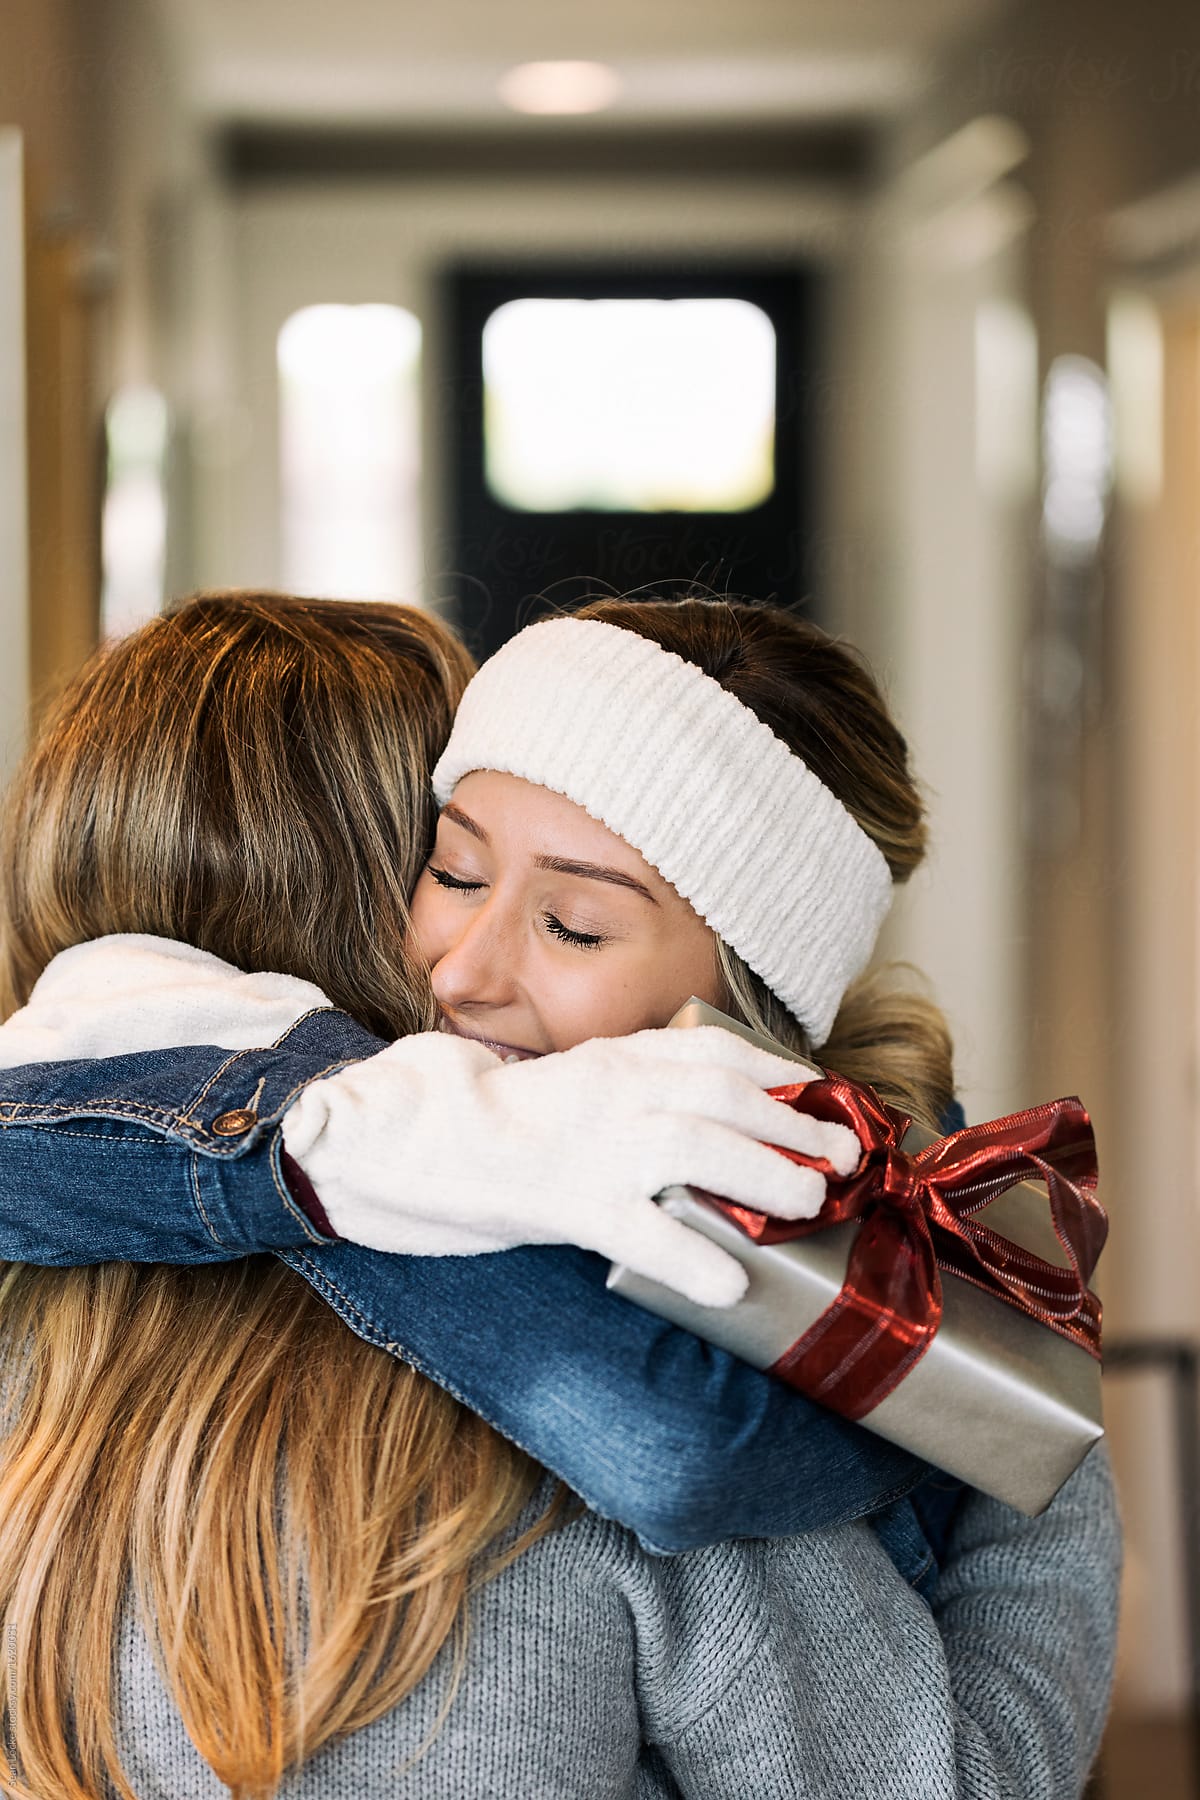 Home: Student Gives Mother Hug After Returning For Christmas